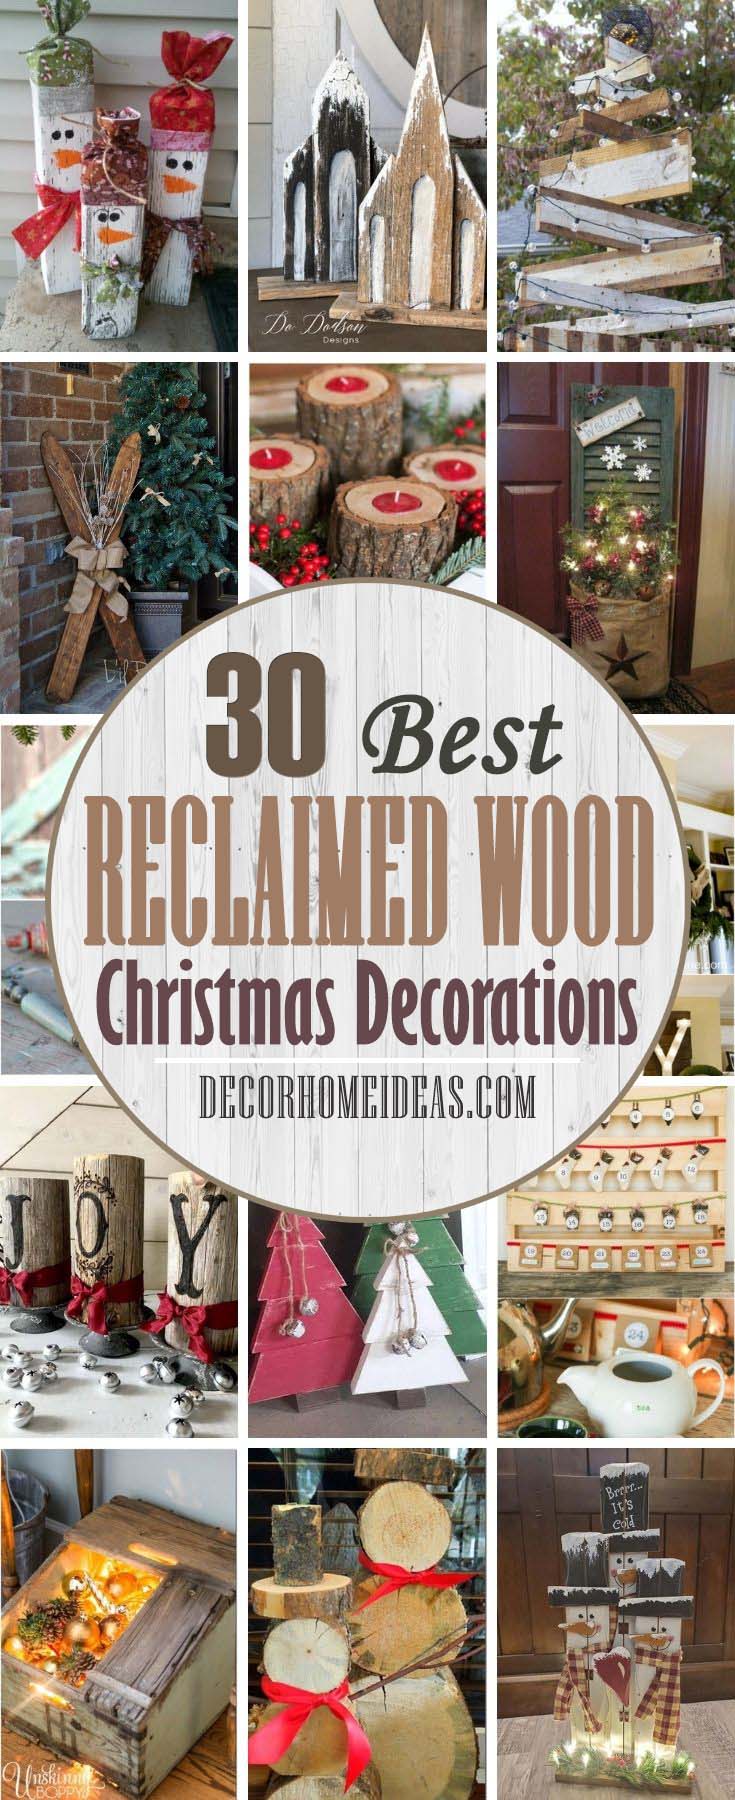 Best Reclaimed Wood Christmas Decorations. Christmas decorations don't have to be expensive. For example, you can make something from reclaimed wood. Here are some ideas! #decorhomeideas